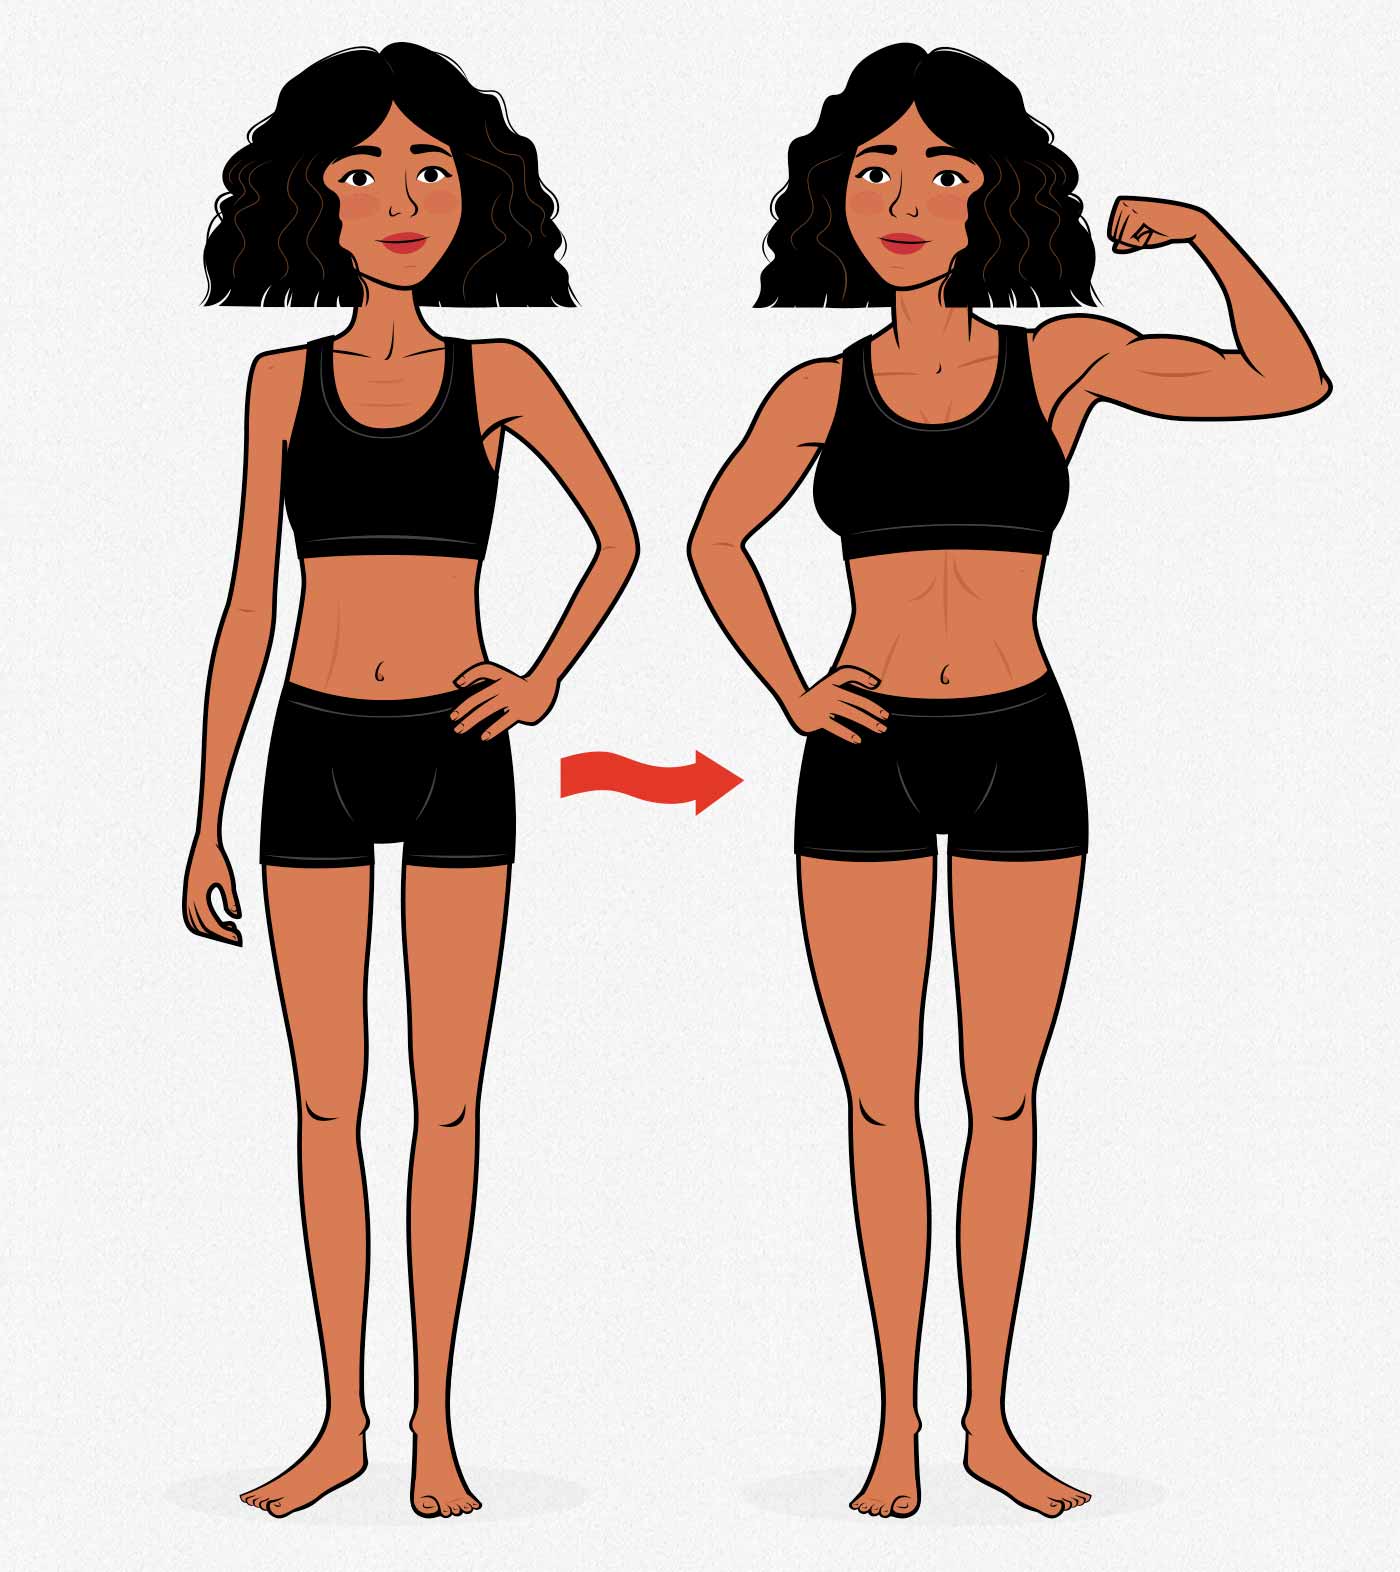 Illustration of a thin woman gaining weight and building muscle.